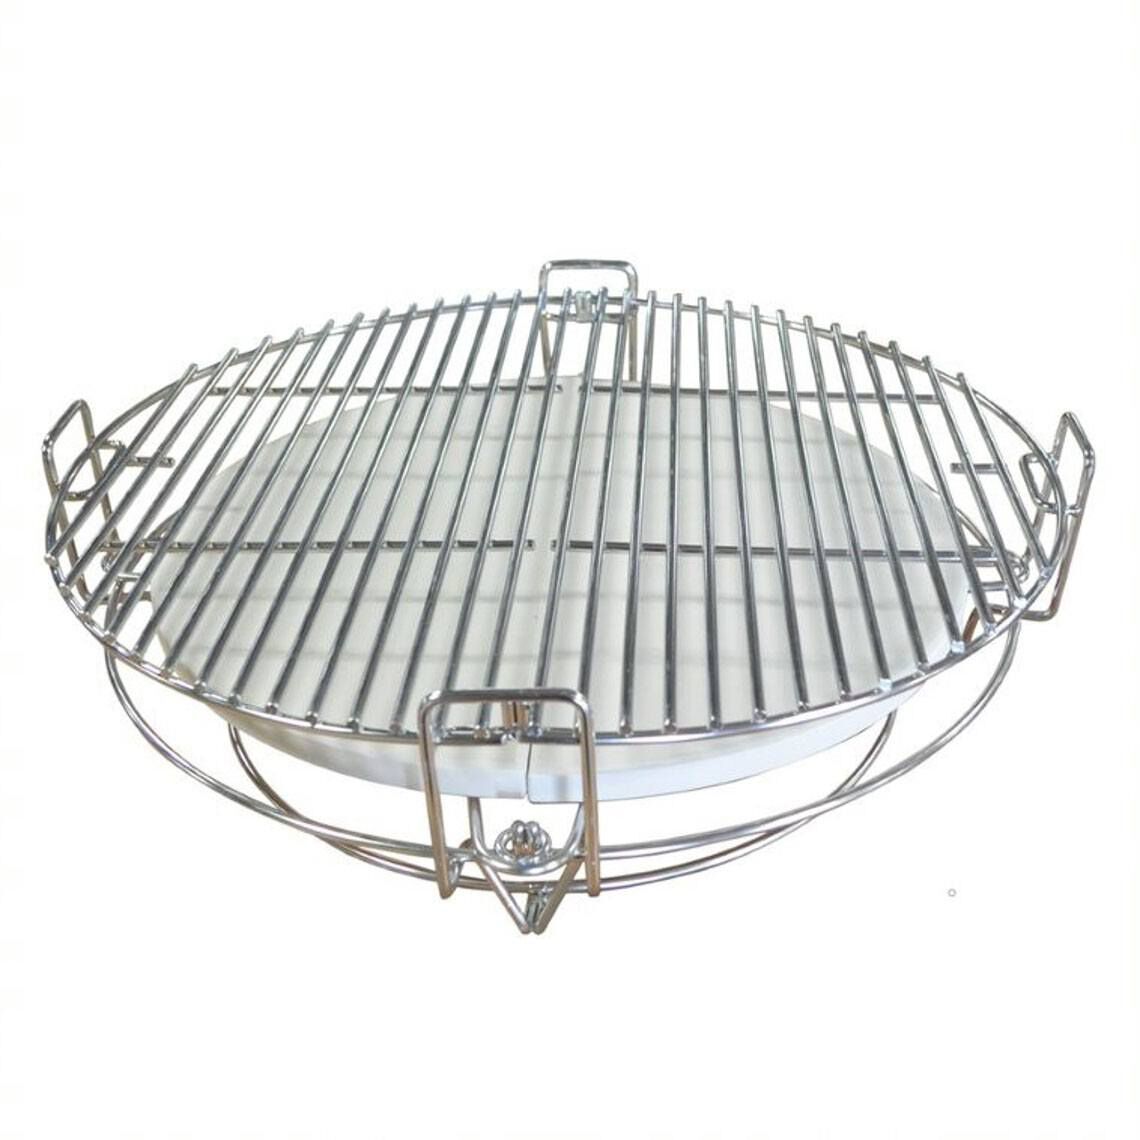 Multi-Level Cooking System Fits 15" Grill - Fits Grill Size: 15" | 15" - view 1